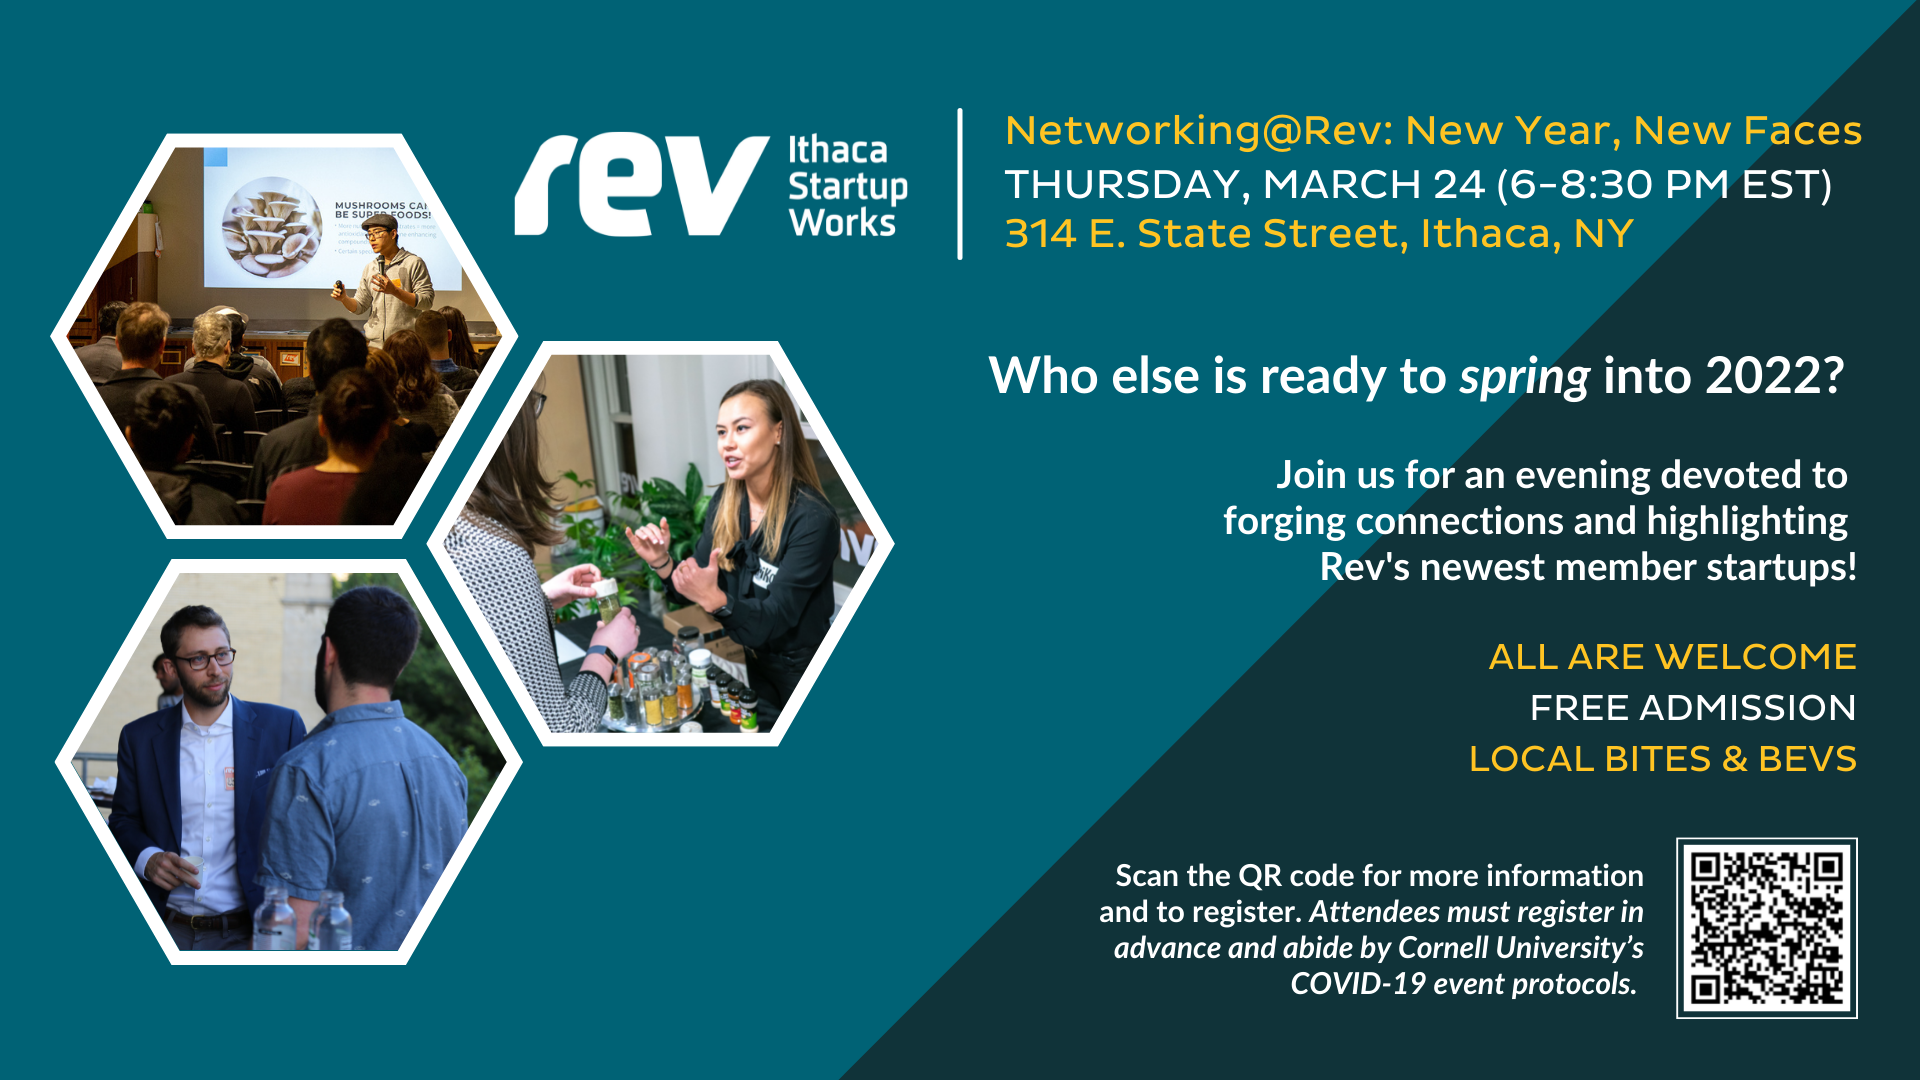 Rev: Ithaca Startup Works. Networking@Rev: New Year, New Faces. Thursday, March 24 (6-8:30 p.m. EST). 314 E. State Street, Ithaca, NY. Who else is ready to spring into 2022? Join us for an evening devoted to forging connections and highlighting Rev's newest member startups! All are welcome. Free admission. Local bites and bevs. Scan the QR code for more information and to register. Attendees must register in advance and abide by Cornell's COVID-19 protocols.